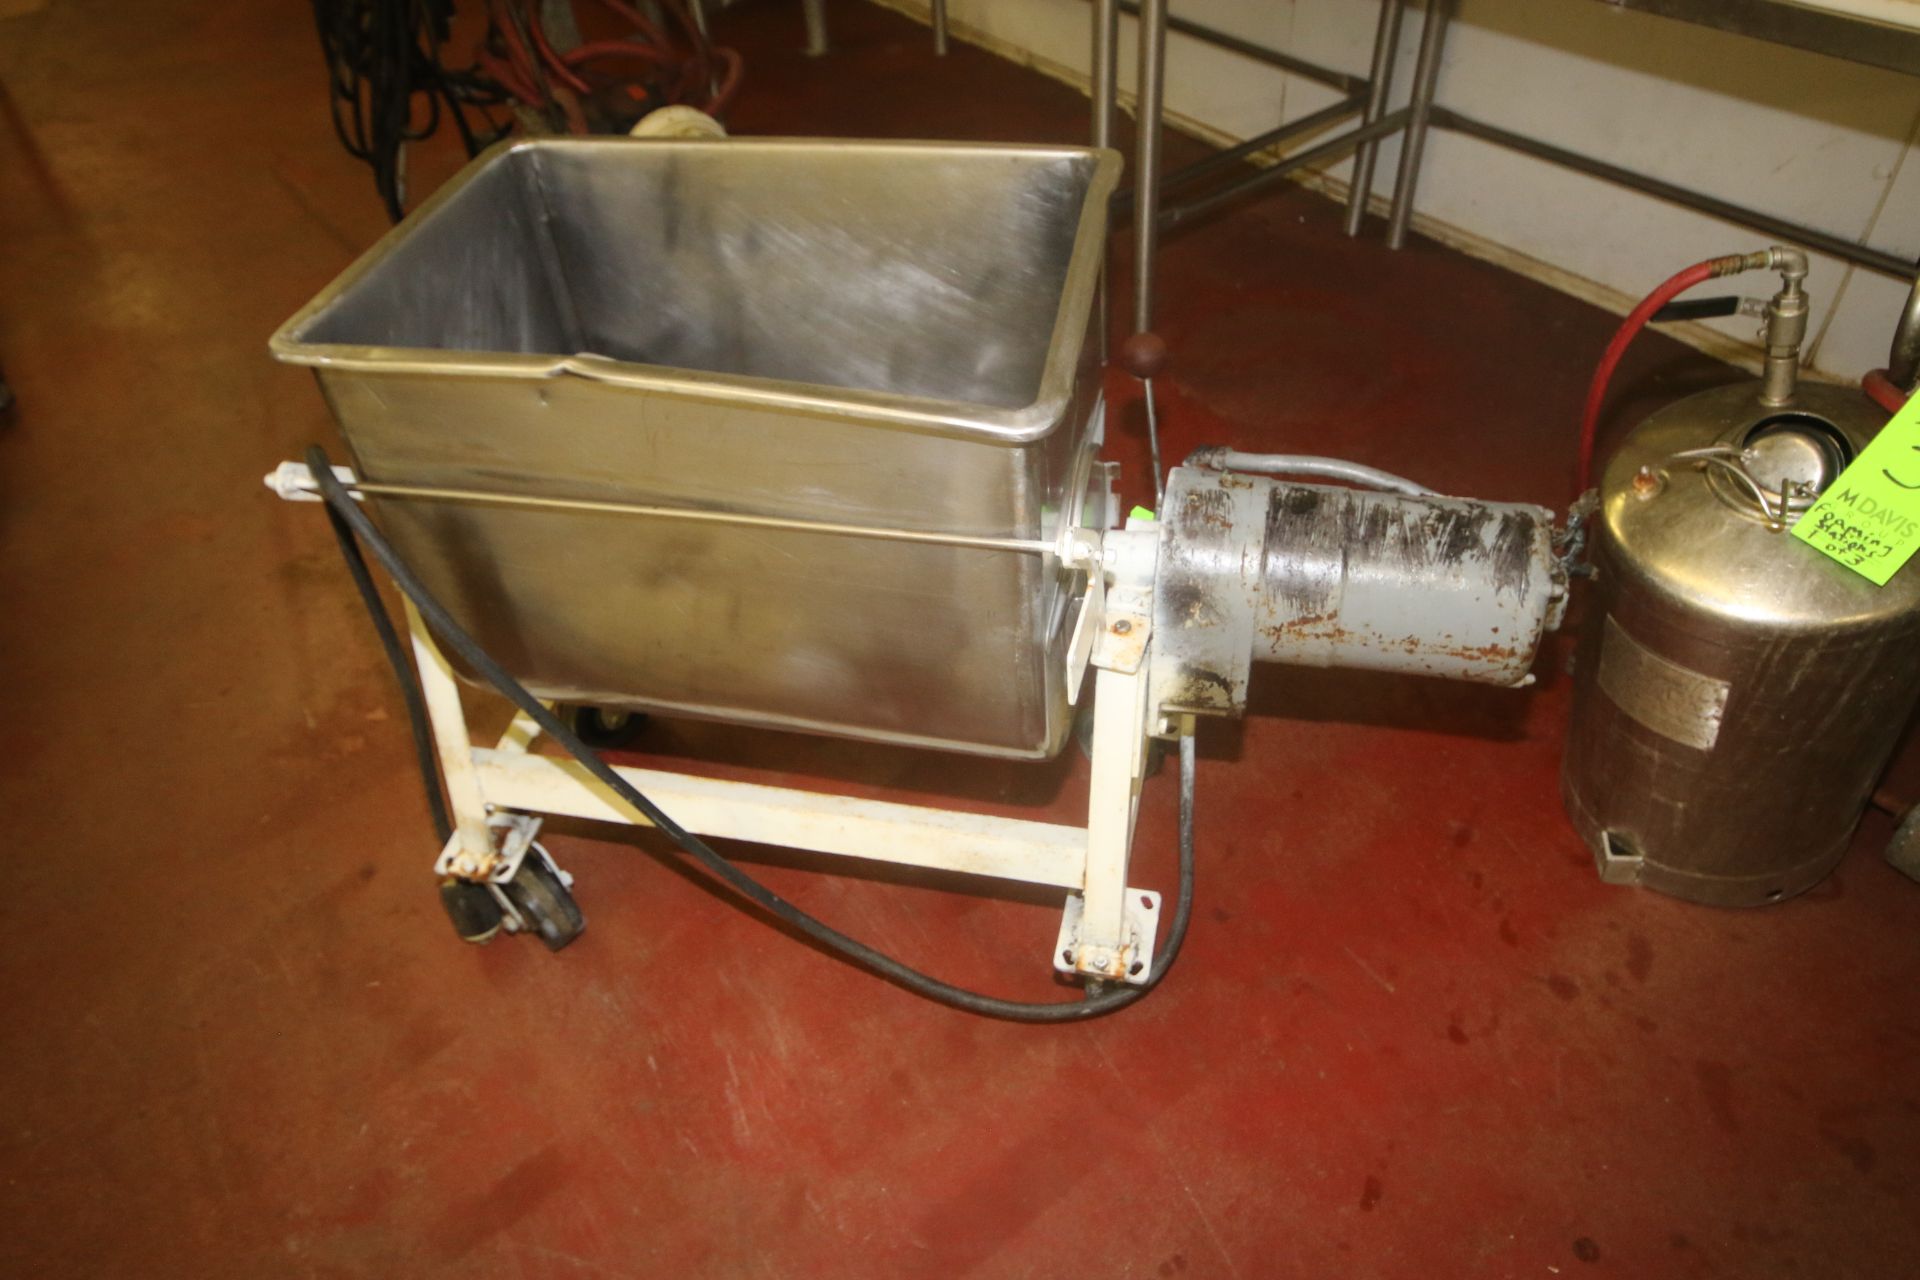 S/S Paddle Blender, Compartment Dims.: Aprox. 23-1/2" L x 16" W x 20" Deep, with Hydraulic Motor, - Image 12 of 14